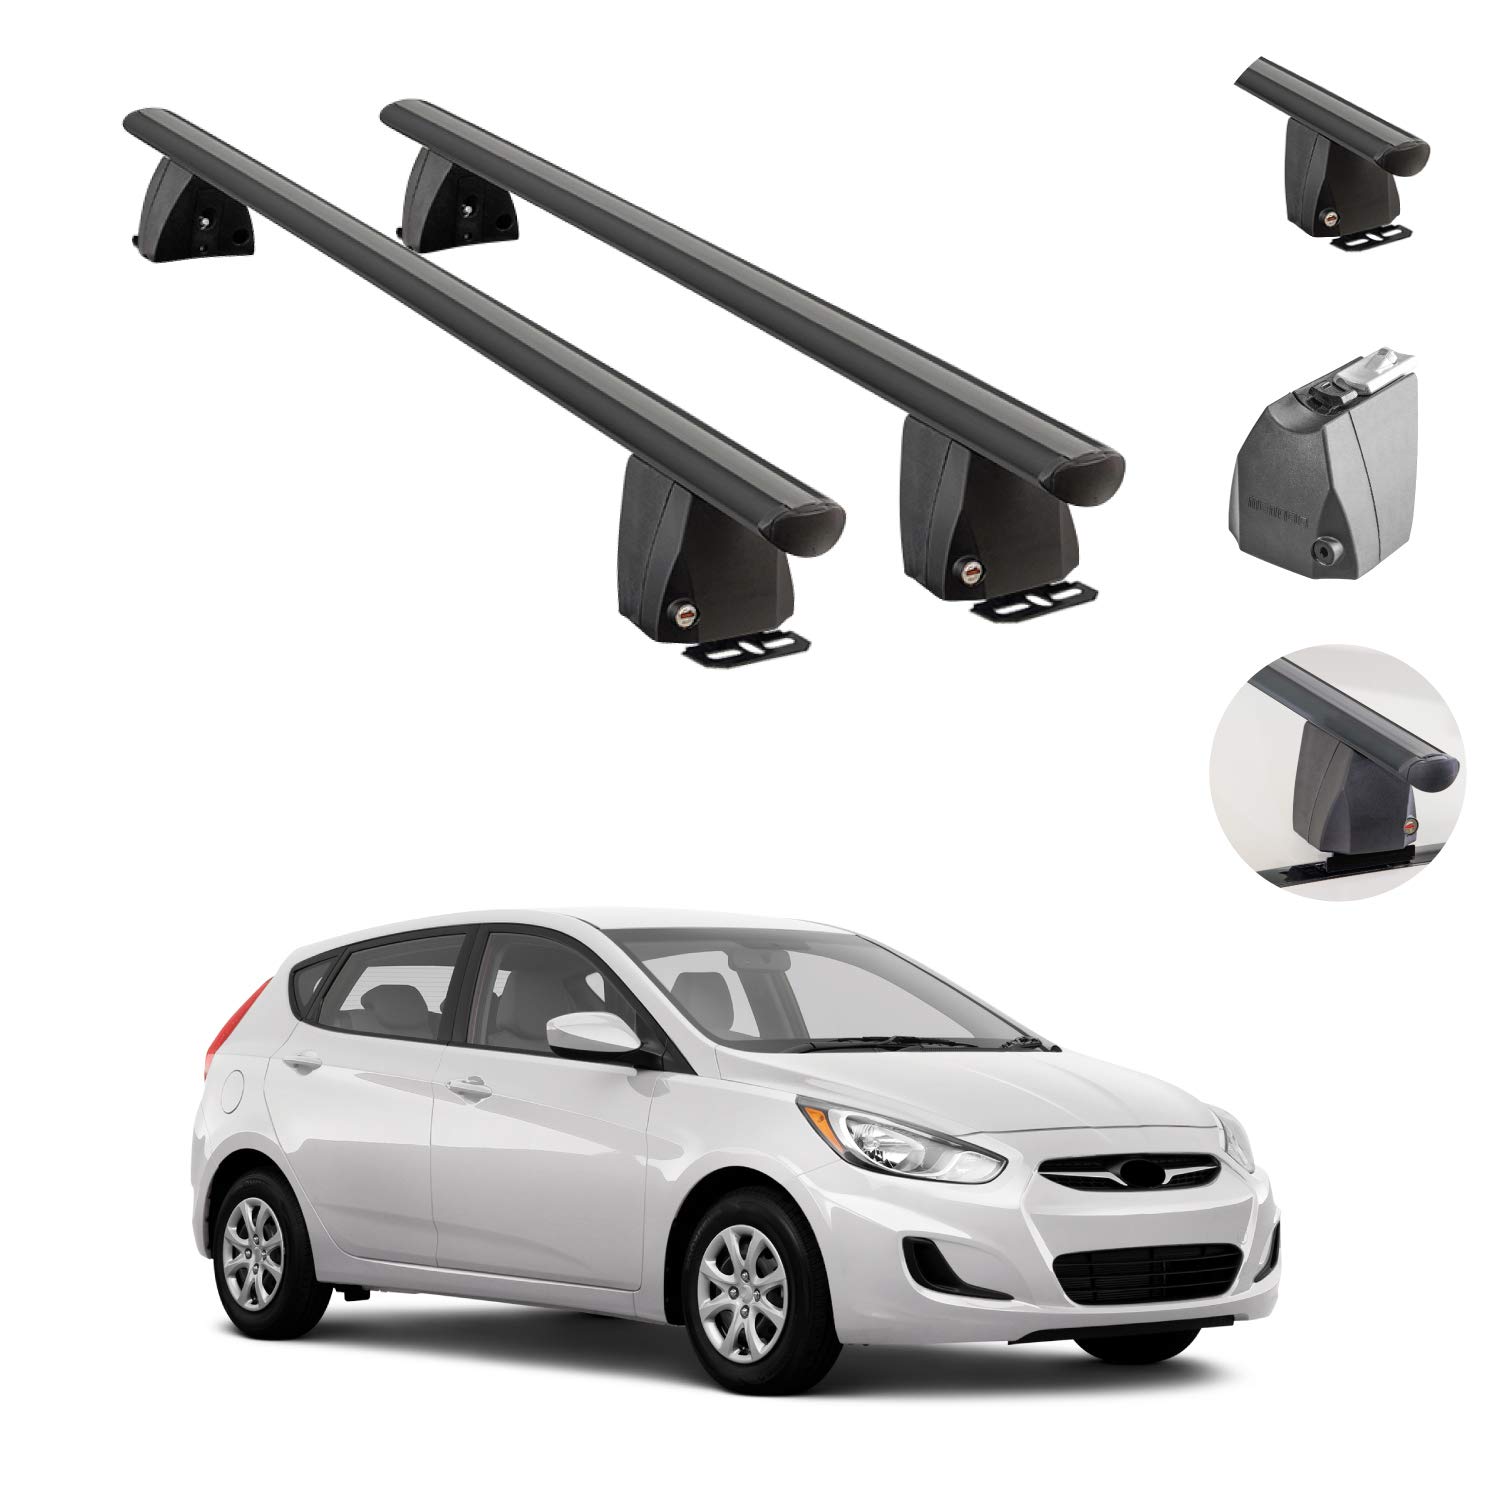 Amazon.com: Roof Rack Cross Bars Fits Hyundai Accent Hatchback 2012-2017  Lockable Luggage Carrier Fixed Point Roof Cars | Black Aluminum Cargo  Carrier Rooftop Bars | Automotive Exterior Accessories : Automotive